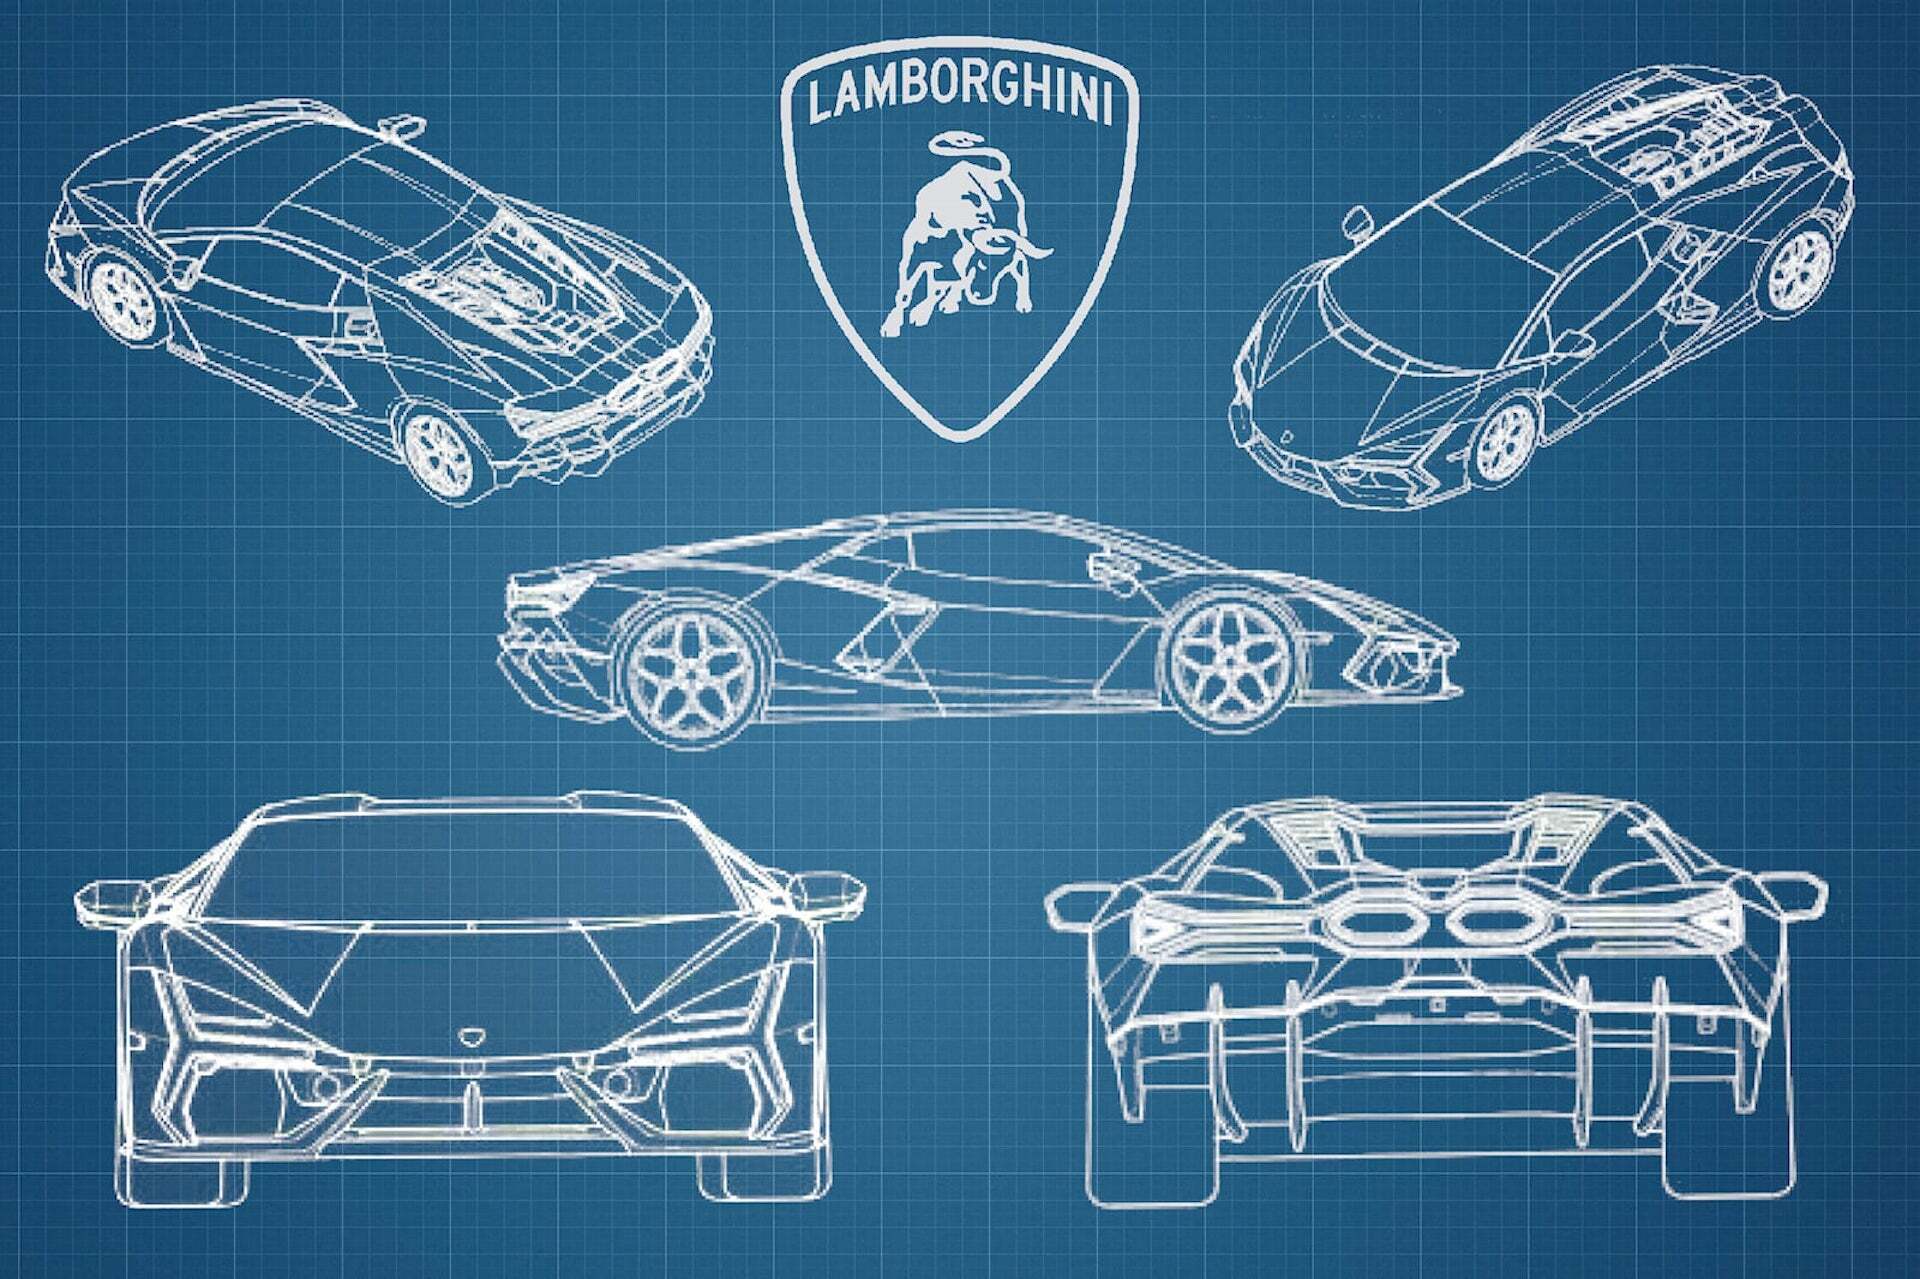 Someone Has Slipped Out The Design Of Lamborghini's New Supercar, And It's A Potpourri Of Different Models